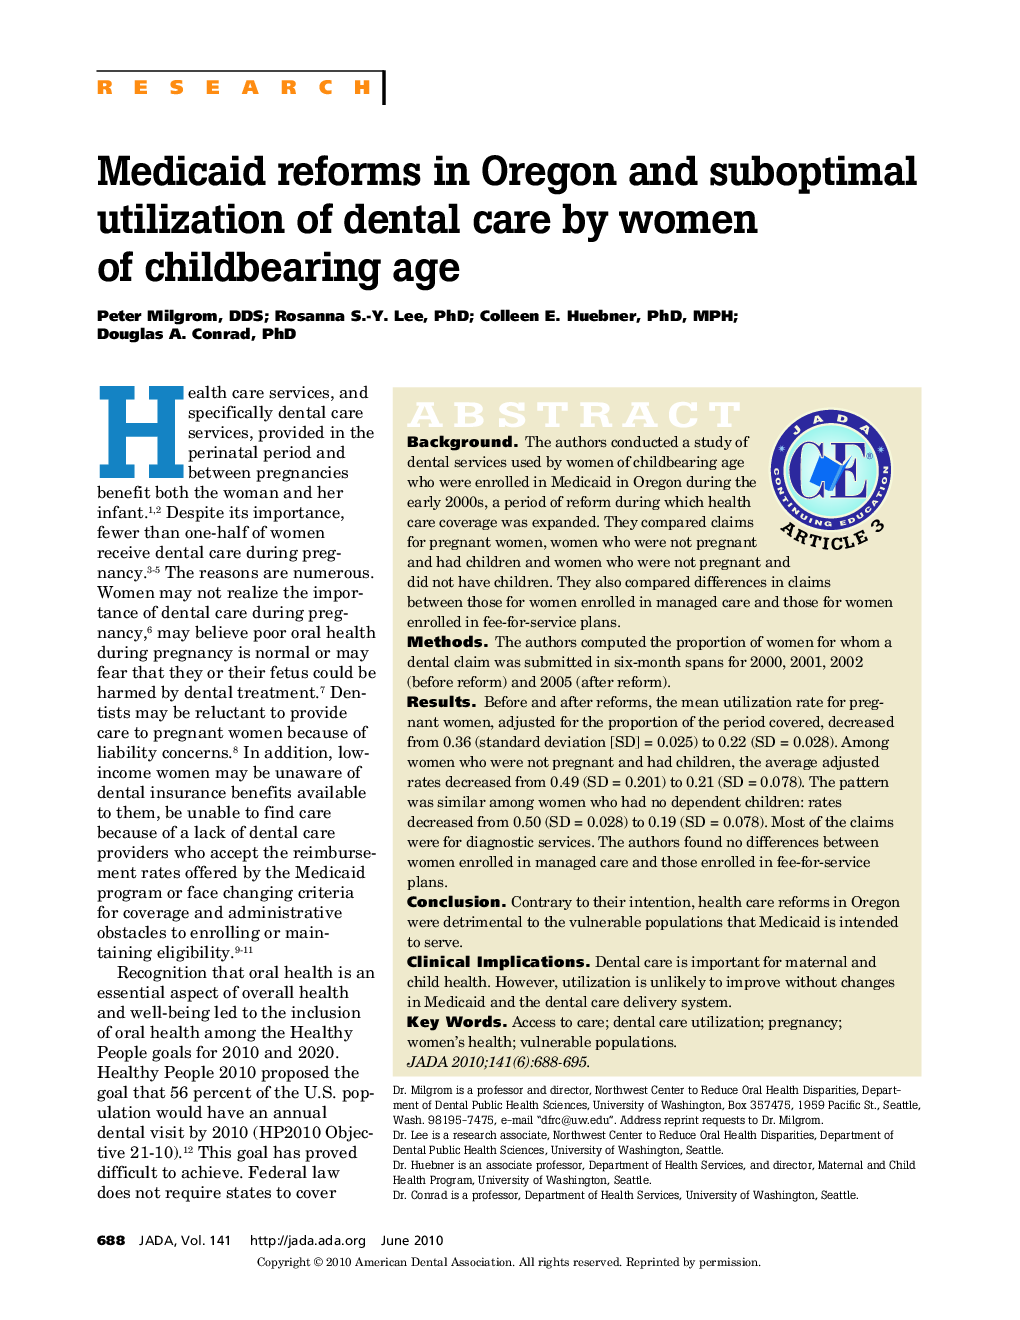 Medicaid Reforms in Oregon and Suboptimal Utilization of Dental Care by Women of Childbearing Age